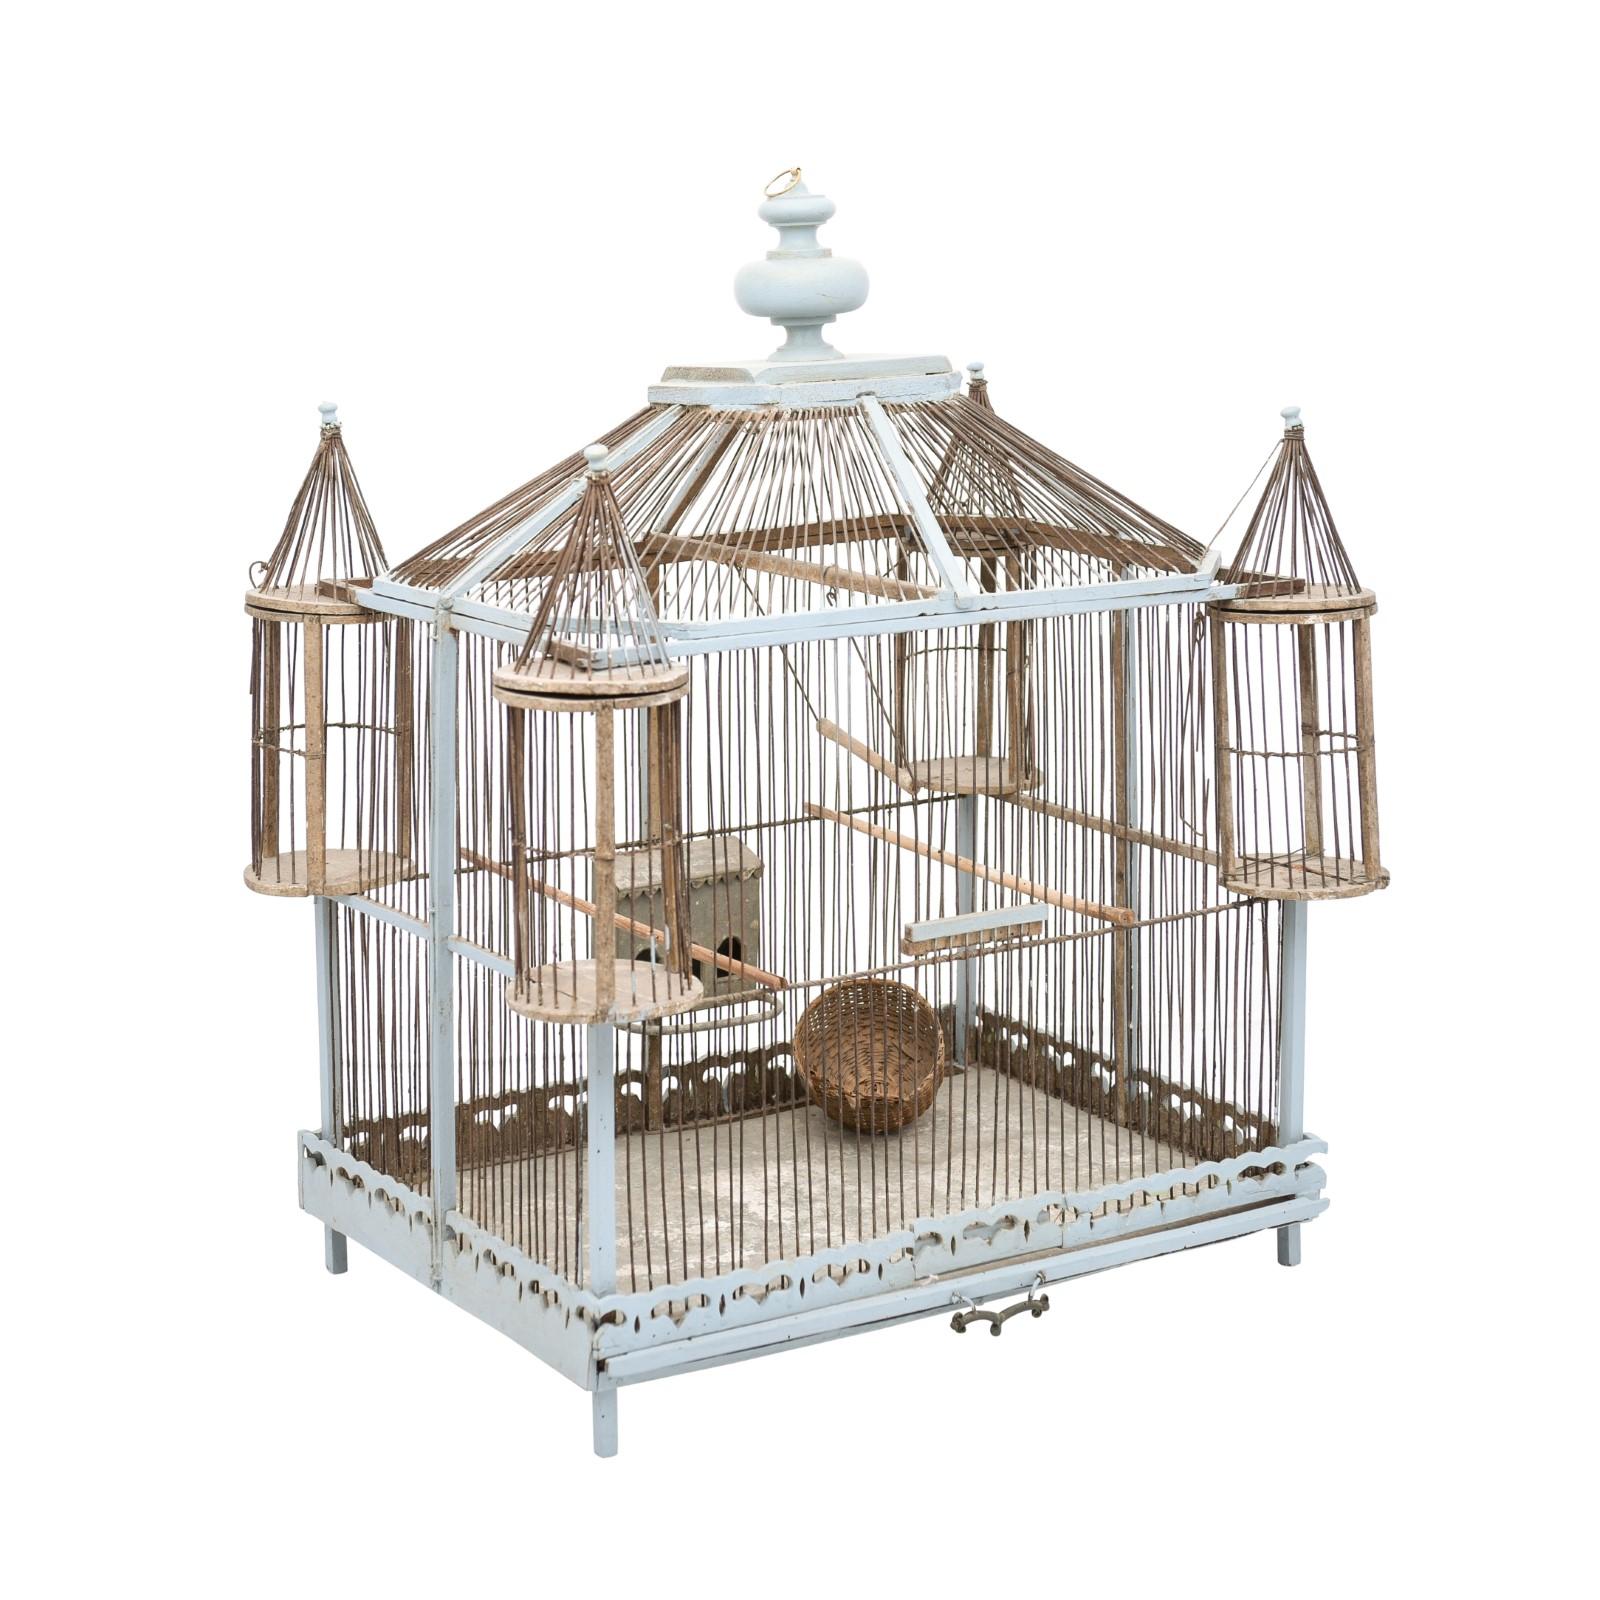 A French soft blue painted wood and metal castle inspired bird cage from the 19th century, with turrets, turned finial, petite wicker nest and rustic character. Created in France during the 19th century, this decorative bird cage features a